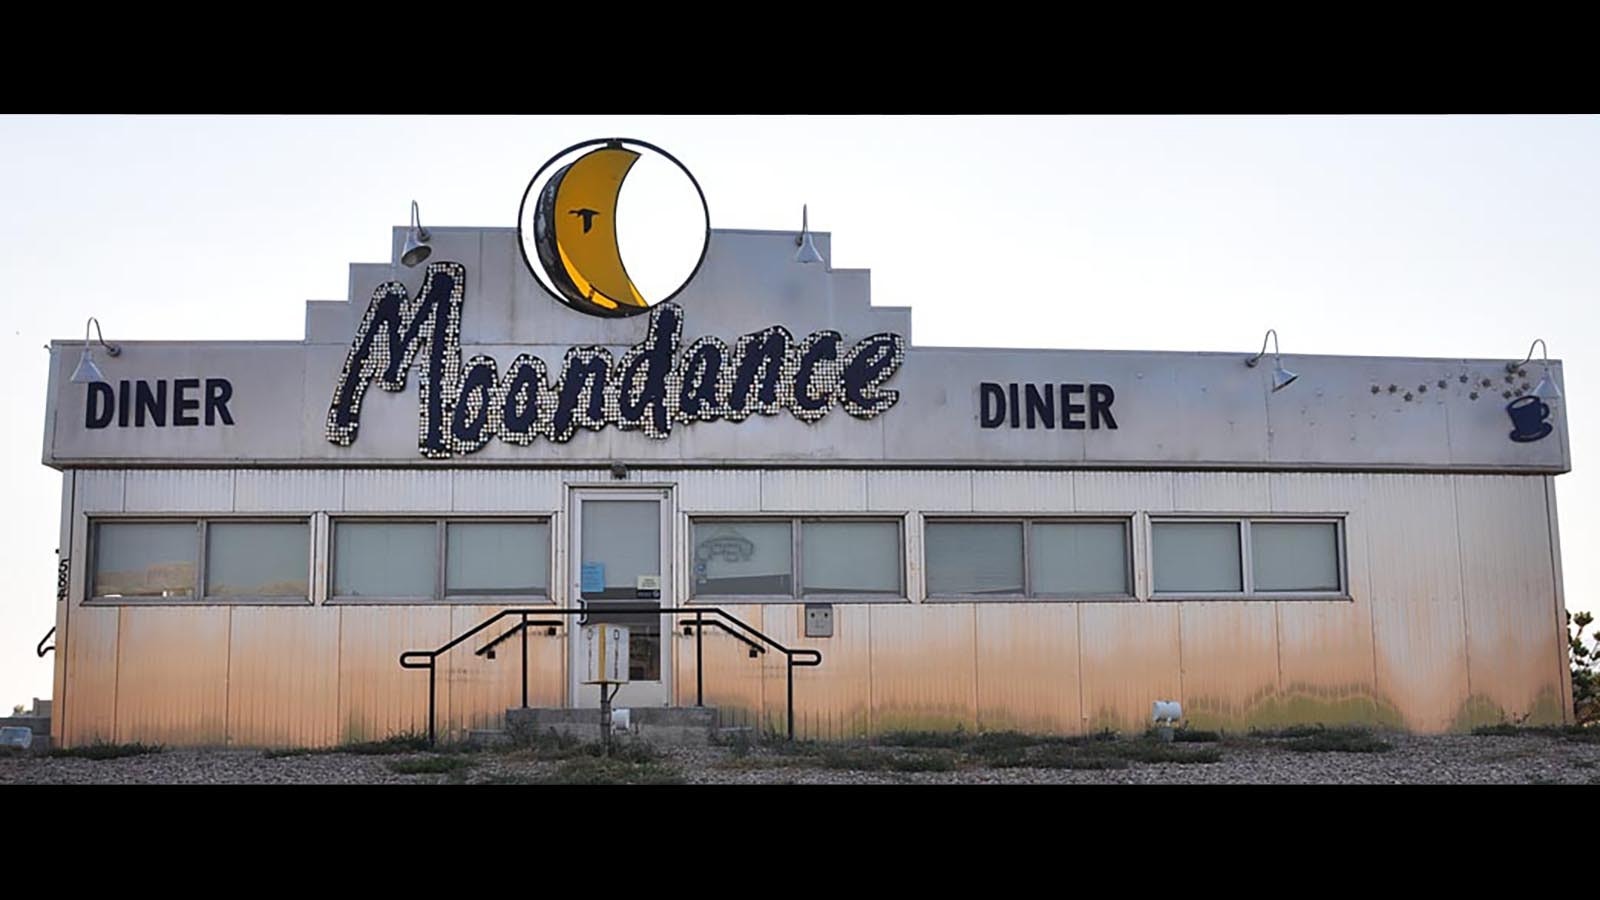 Moondance Diner in LaBarge, Wyoming in its better days. For current photos, scroll down